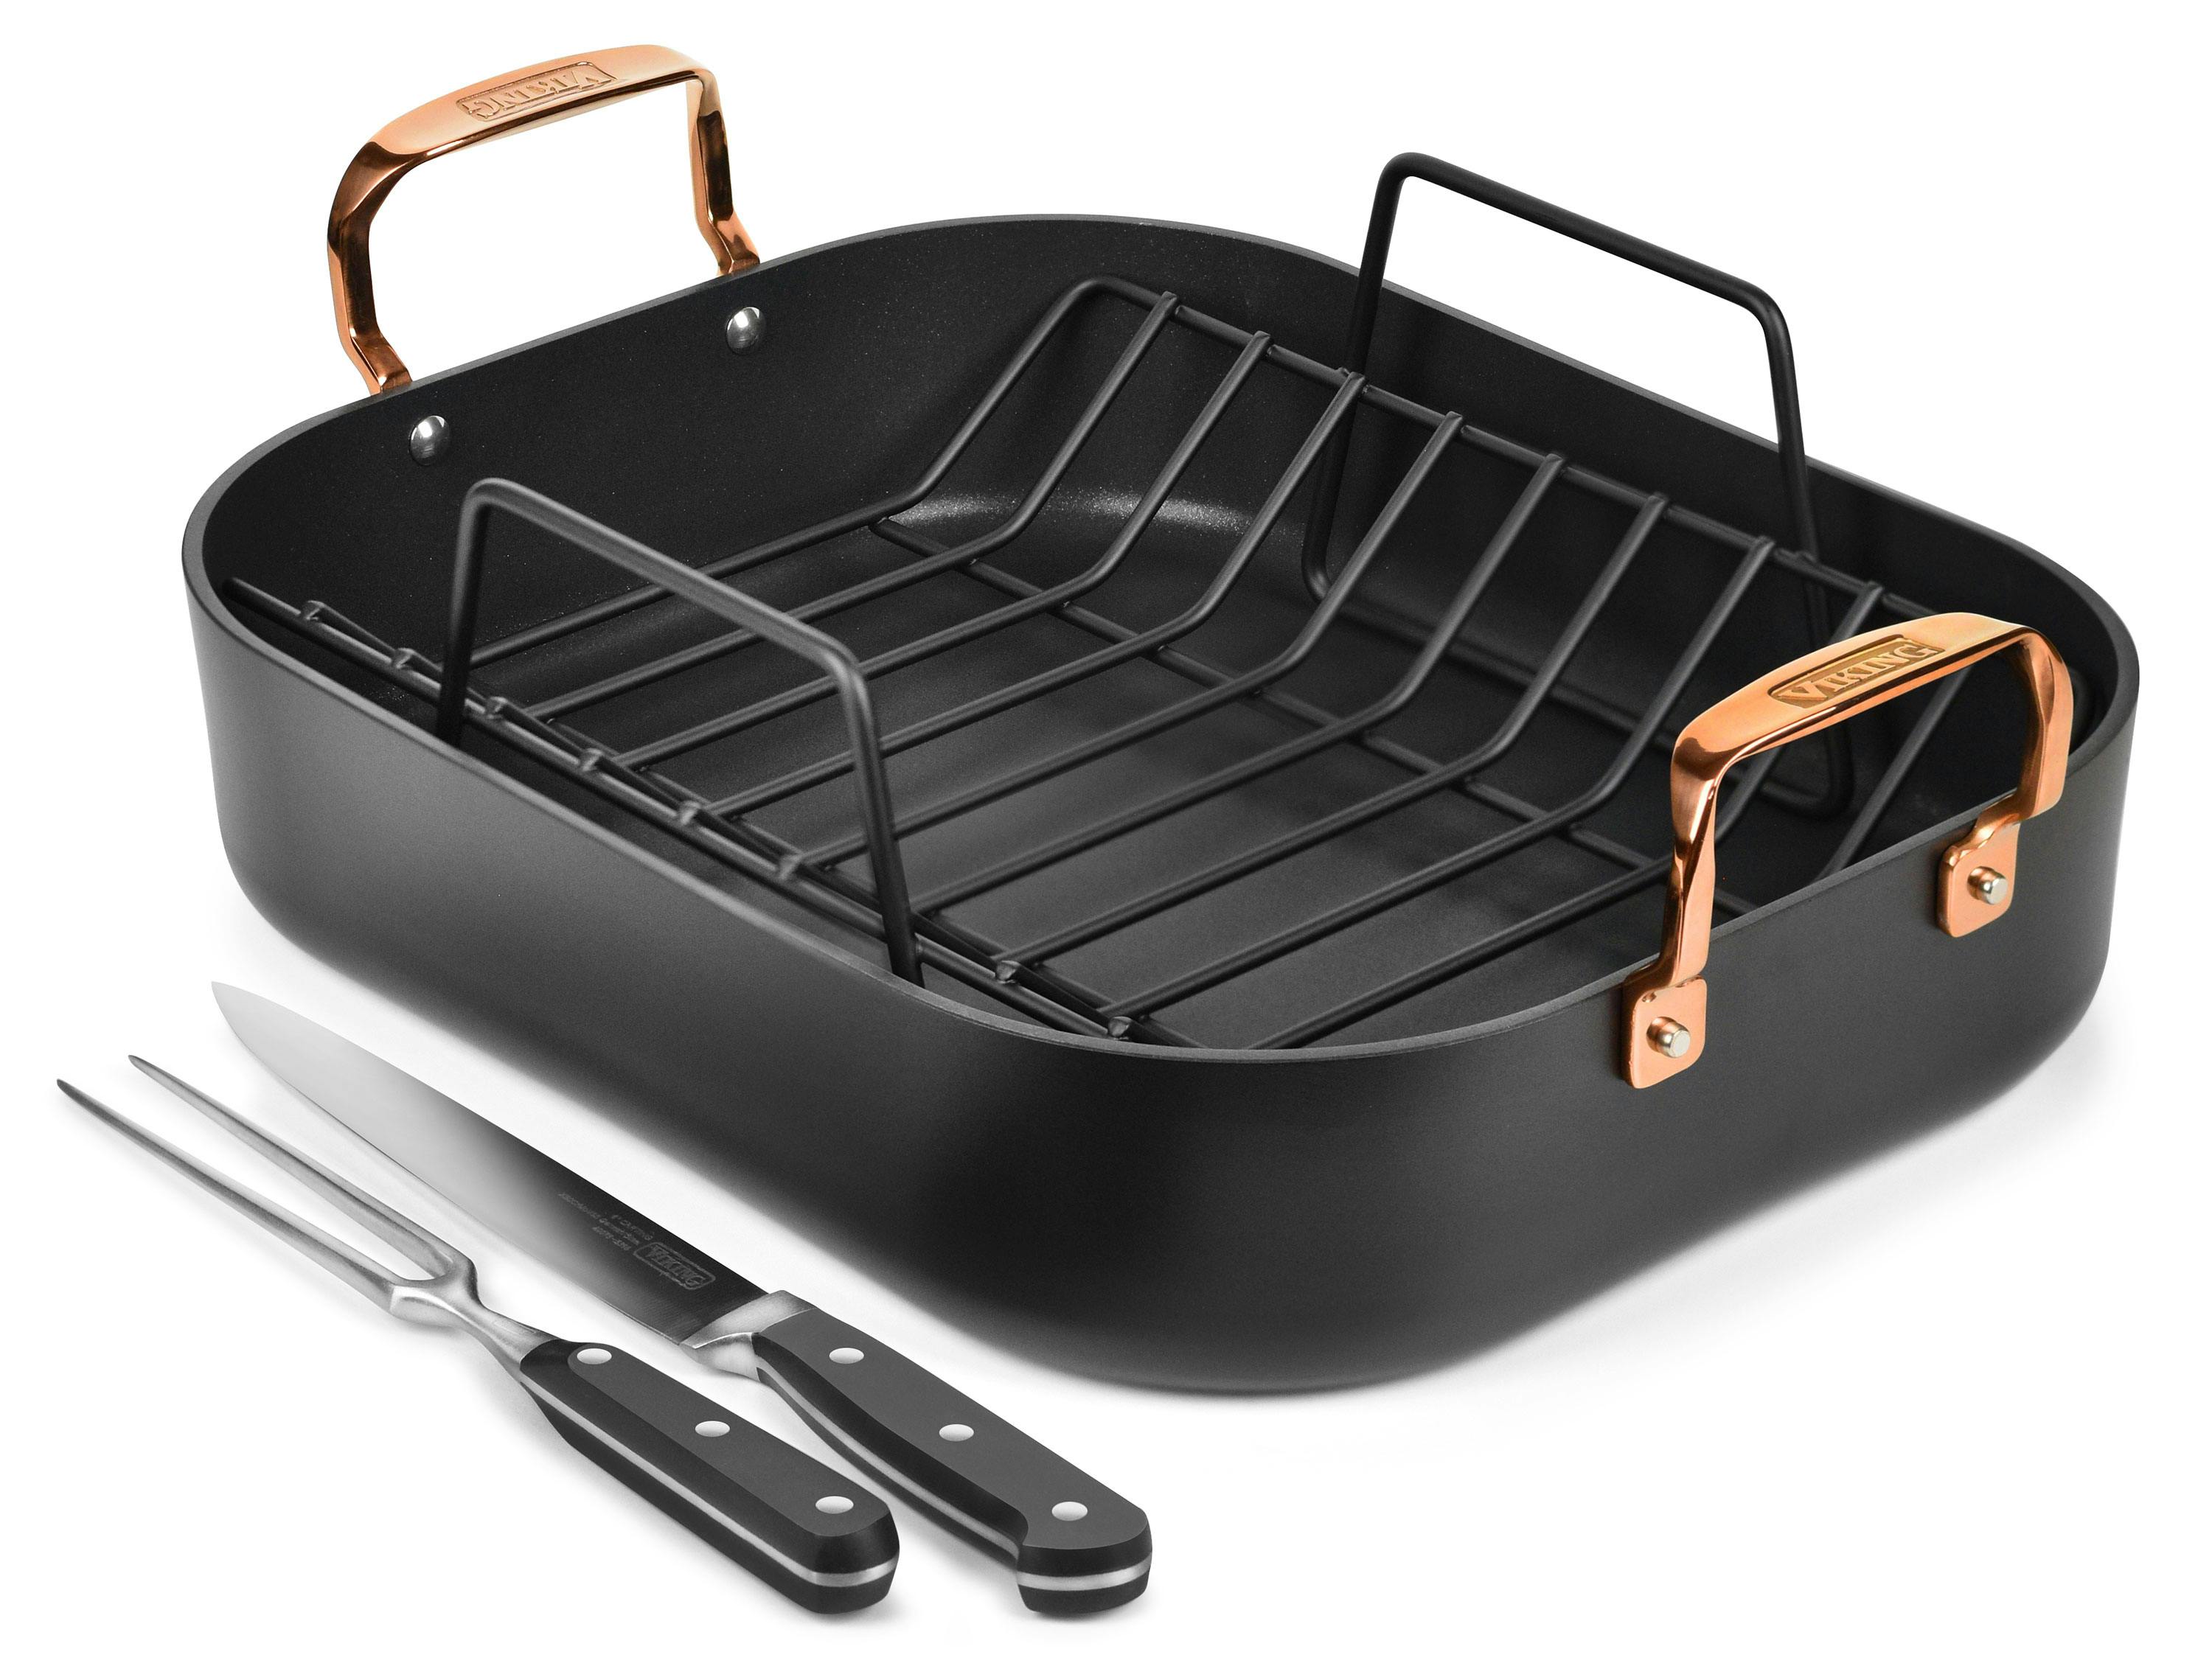 Viking Hard Anodized Nonstick Roaster with Carving Set & Copper Handles